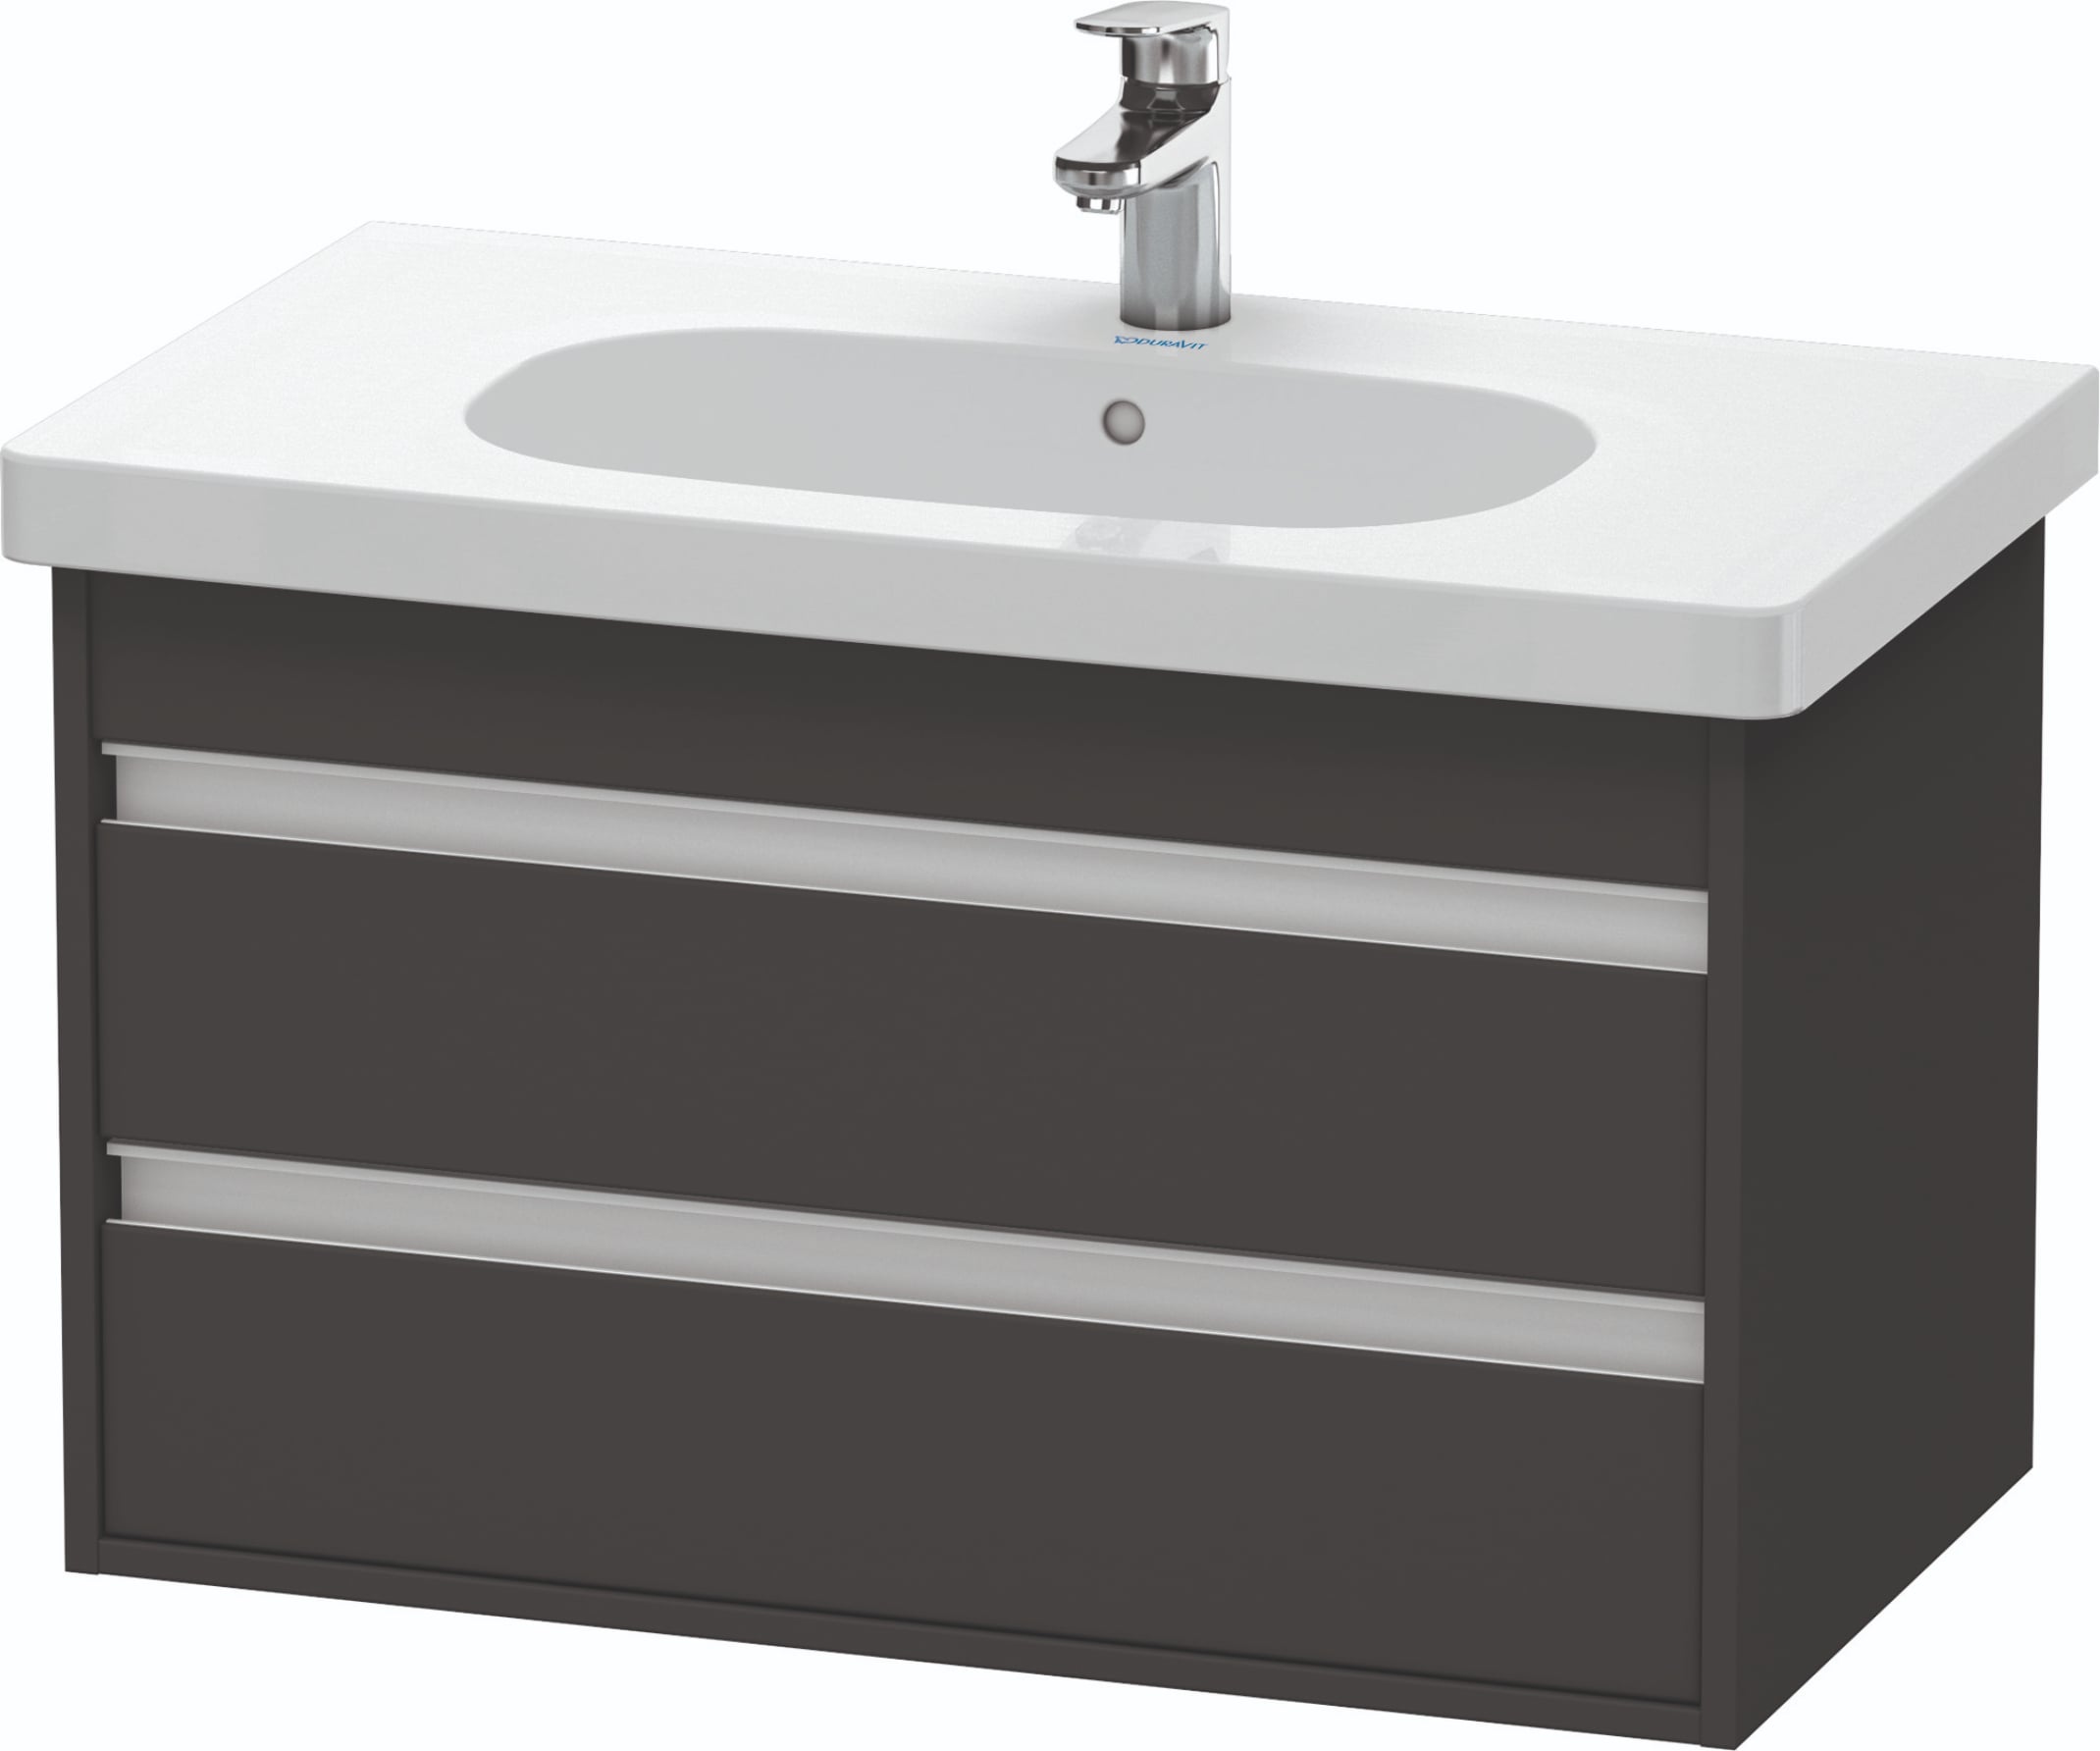 Ketho 31-in Graphite Matte Bathroom Vanity Base Cabinet without Top in Gray | - Duravit KT664704949